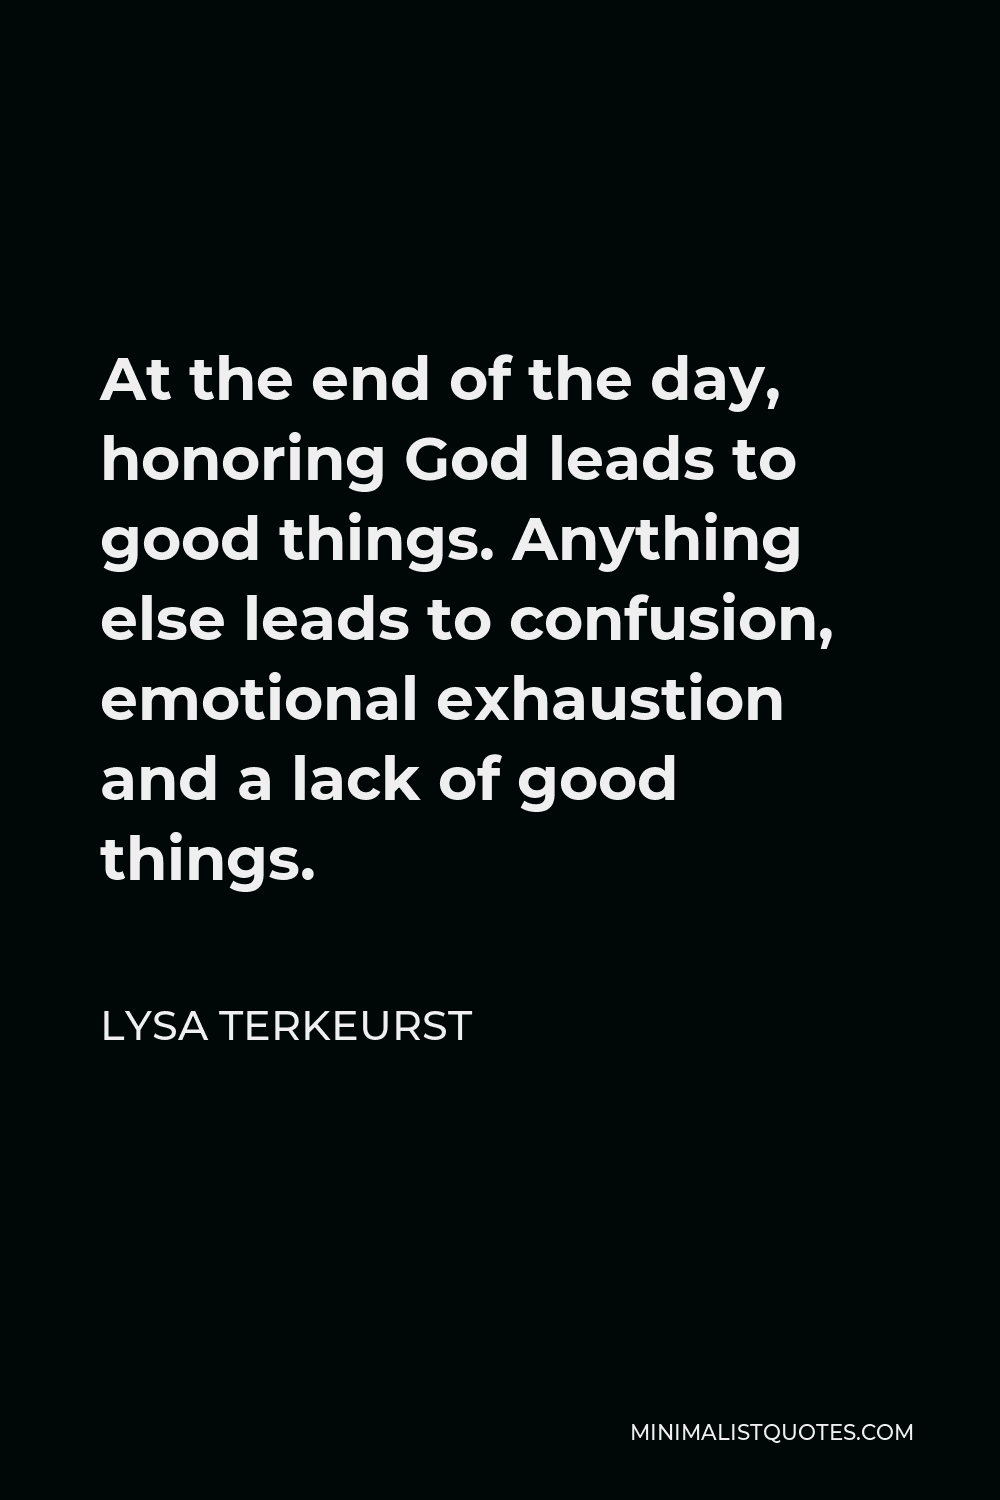 Lysa TerKeurst Quote - At the end of the day, honoring God leads to good things. Anything else leads to confusion, emotional exhaustion and a lack of good things.